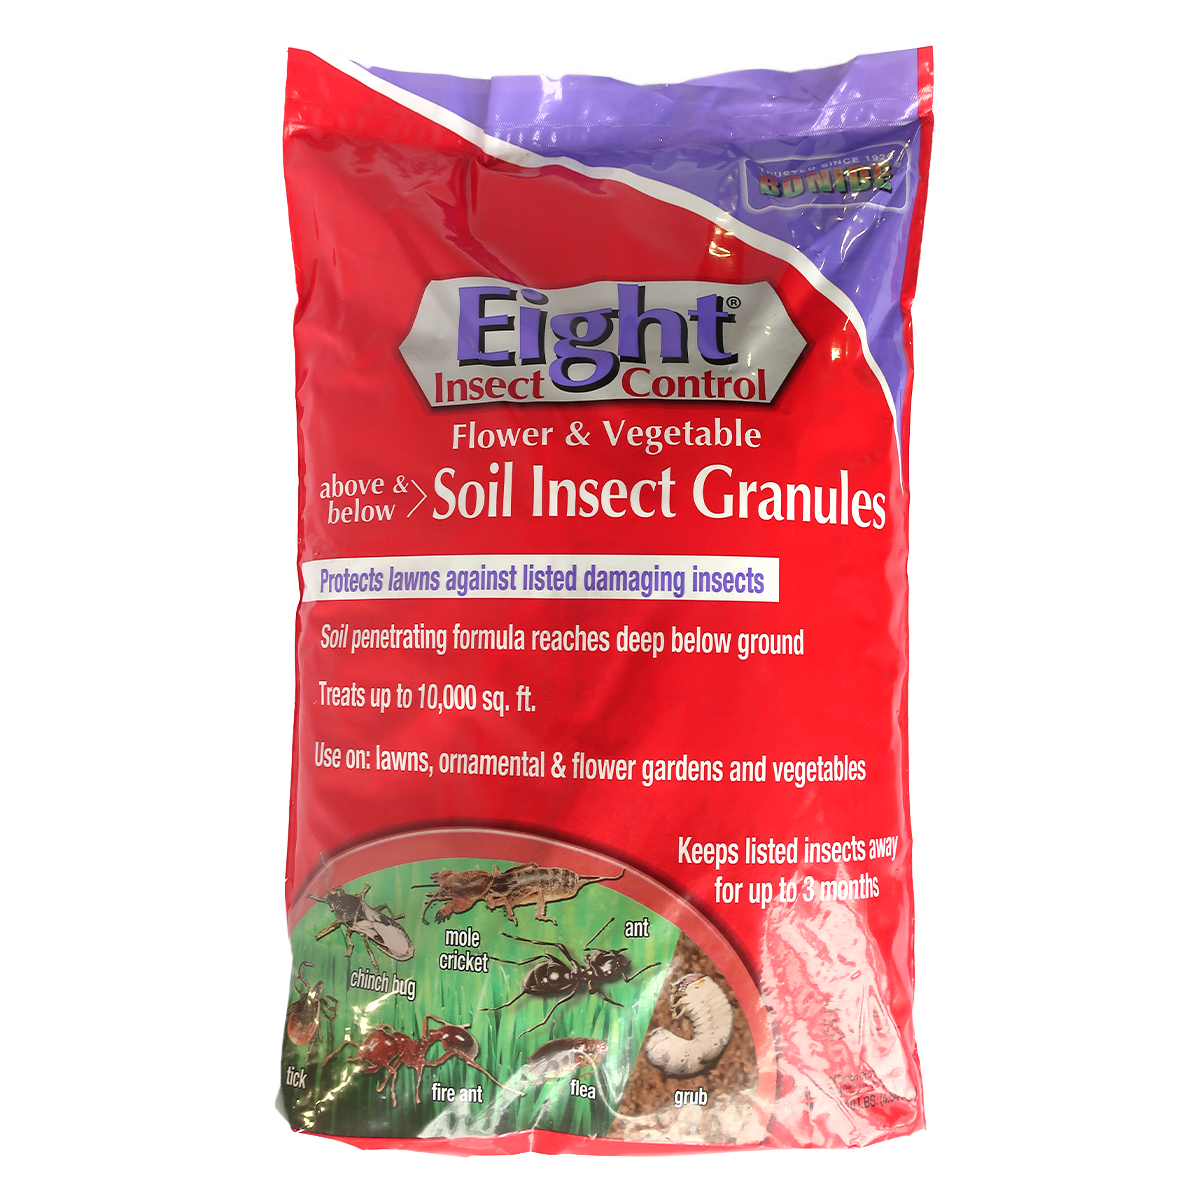 Bag of Eight Insect Control Granules